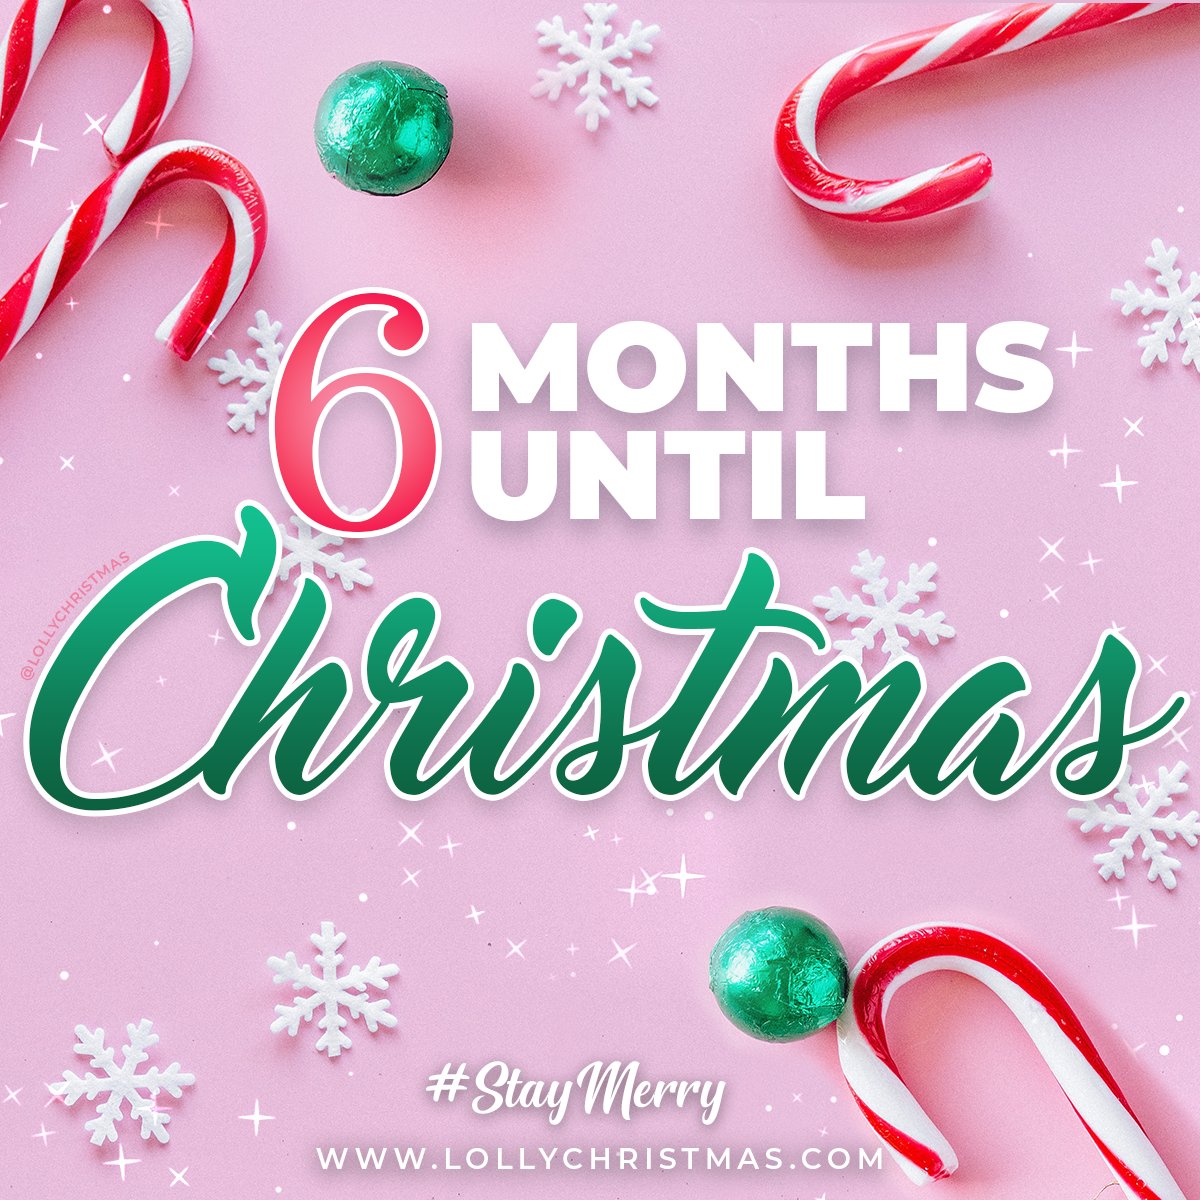 🎄❄️🎄❄️🎄❄️🎄❄️🎄❄️🎄❄️🎄❄️

Merry #LeonDay — aka #Halfmas, because there are only 6 MONTHS UNTIL CHRISTMAS DAY! #StayMerry

#6MonthsUntilChristmas #CountdownToChristmas

🎄❄️🎄❄️🎄❄️🎄❄️🎄❄️🎄❄️🎄❄️